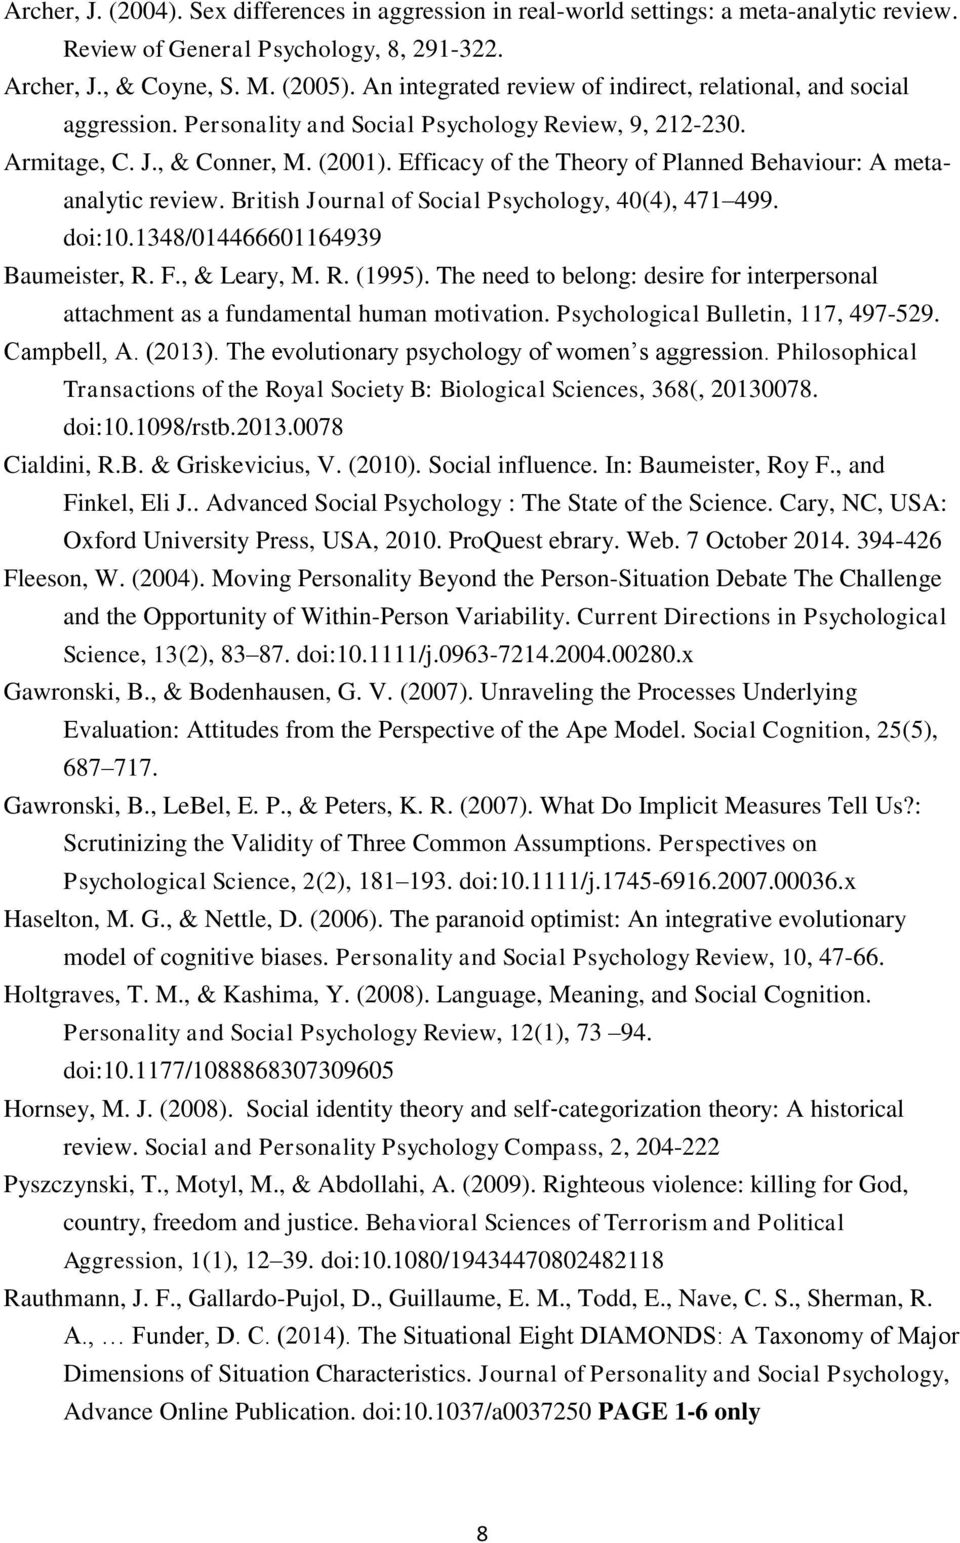 Efficacy of the Theory of Planned Behaviour: A metaanalytic review. British Journal of Social Psychology, 40(4), 471 499. doi:10.1348/014466601164939 Baumeister, R. F., & Leary, M. R. (1995).